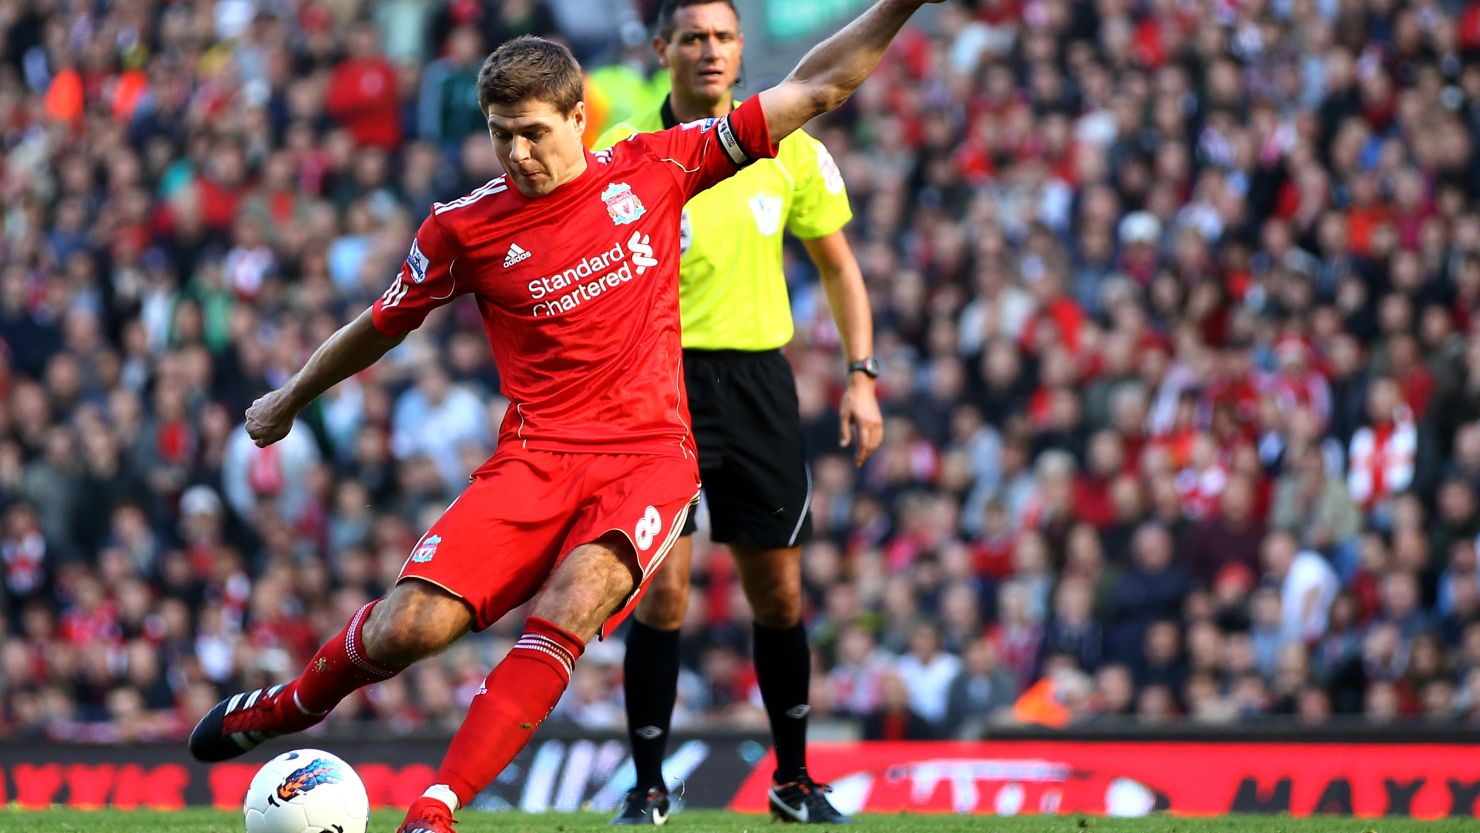 Steven Gerrard scored his first goal of the season in Liverpool's 1-1 draw with Manchester United on October 15.